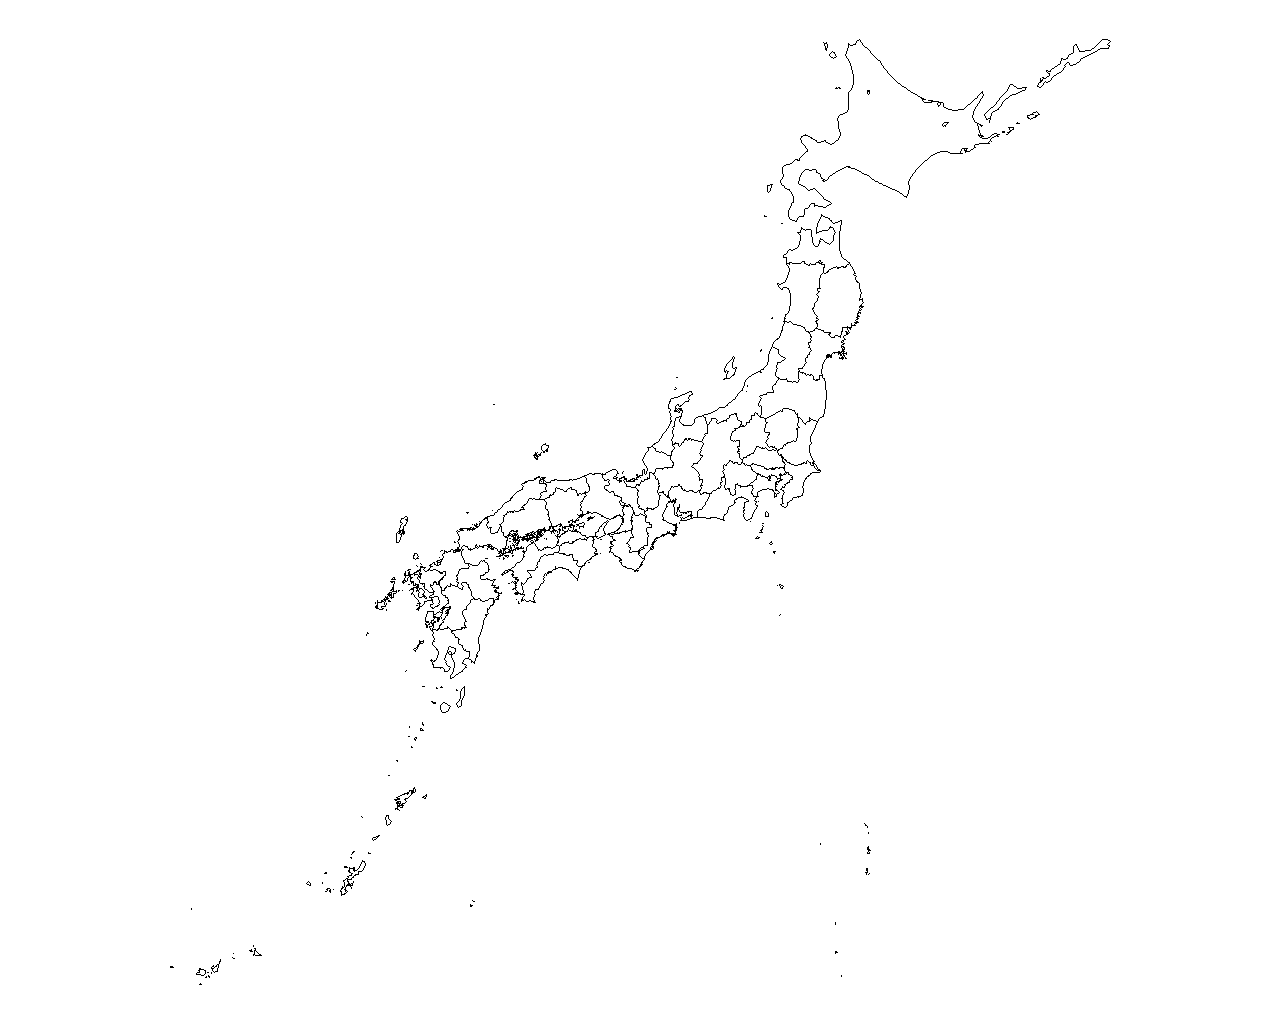 Population pyramids of Aomori, Tokyo, Nagano, and Okinawa on the map of Japan from 2015 to 2045